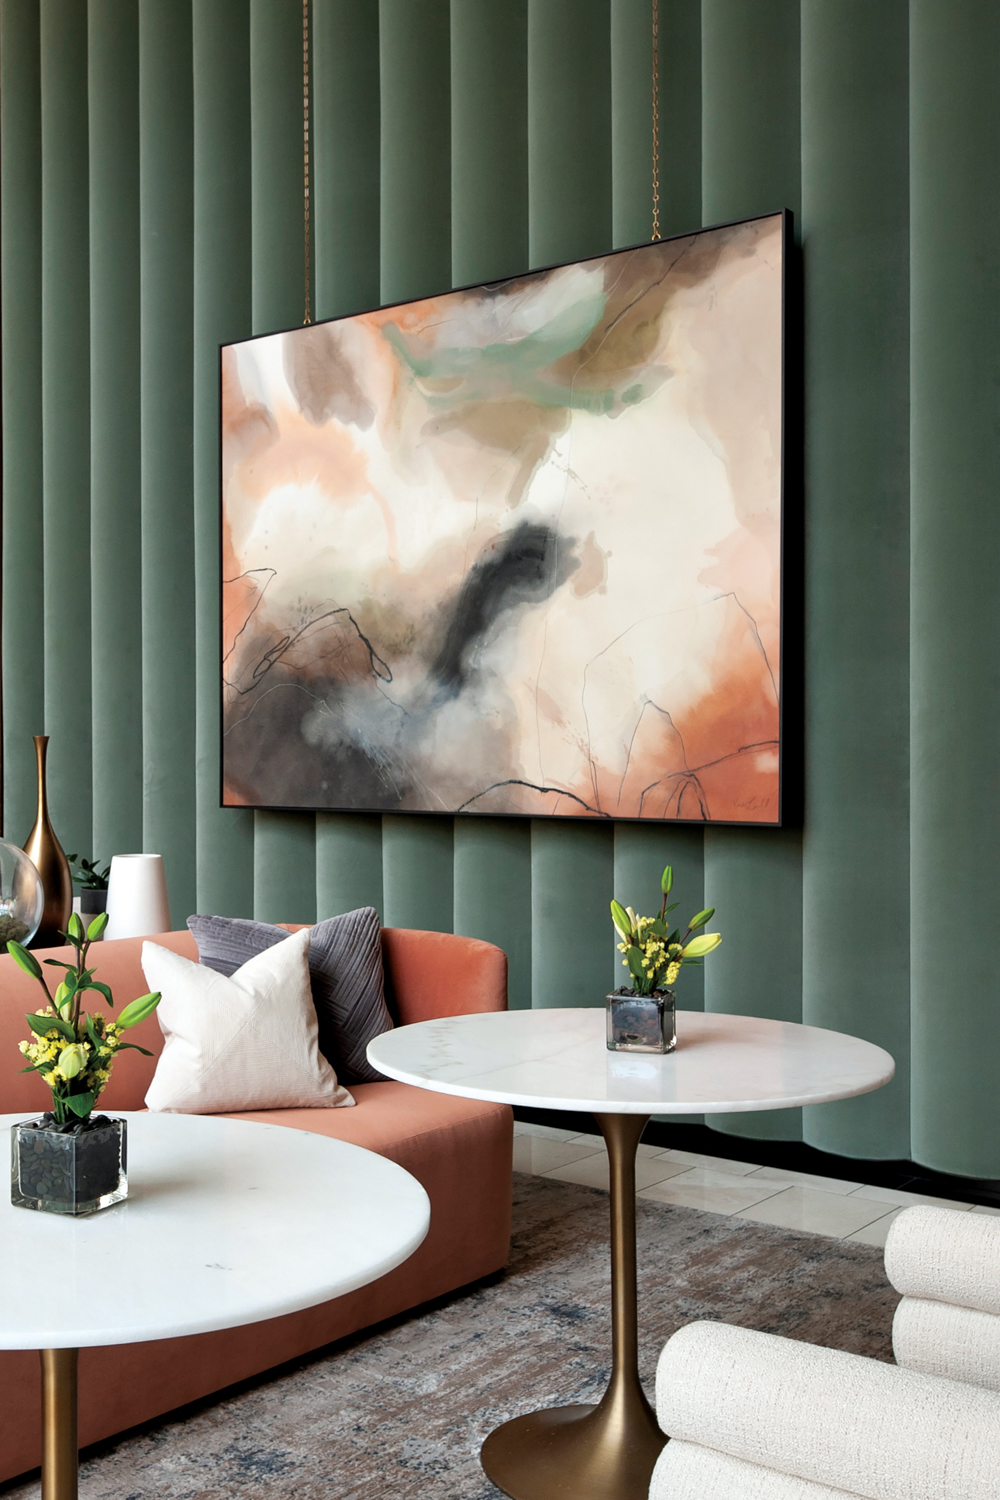 Large abstract artwork hangs against scalloped green wall in a restaurant-like seating area with peach banquette